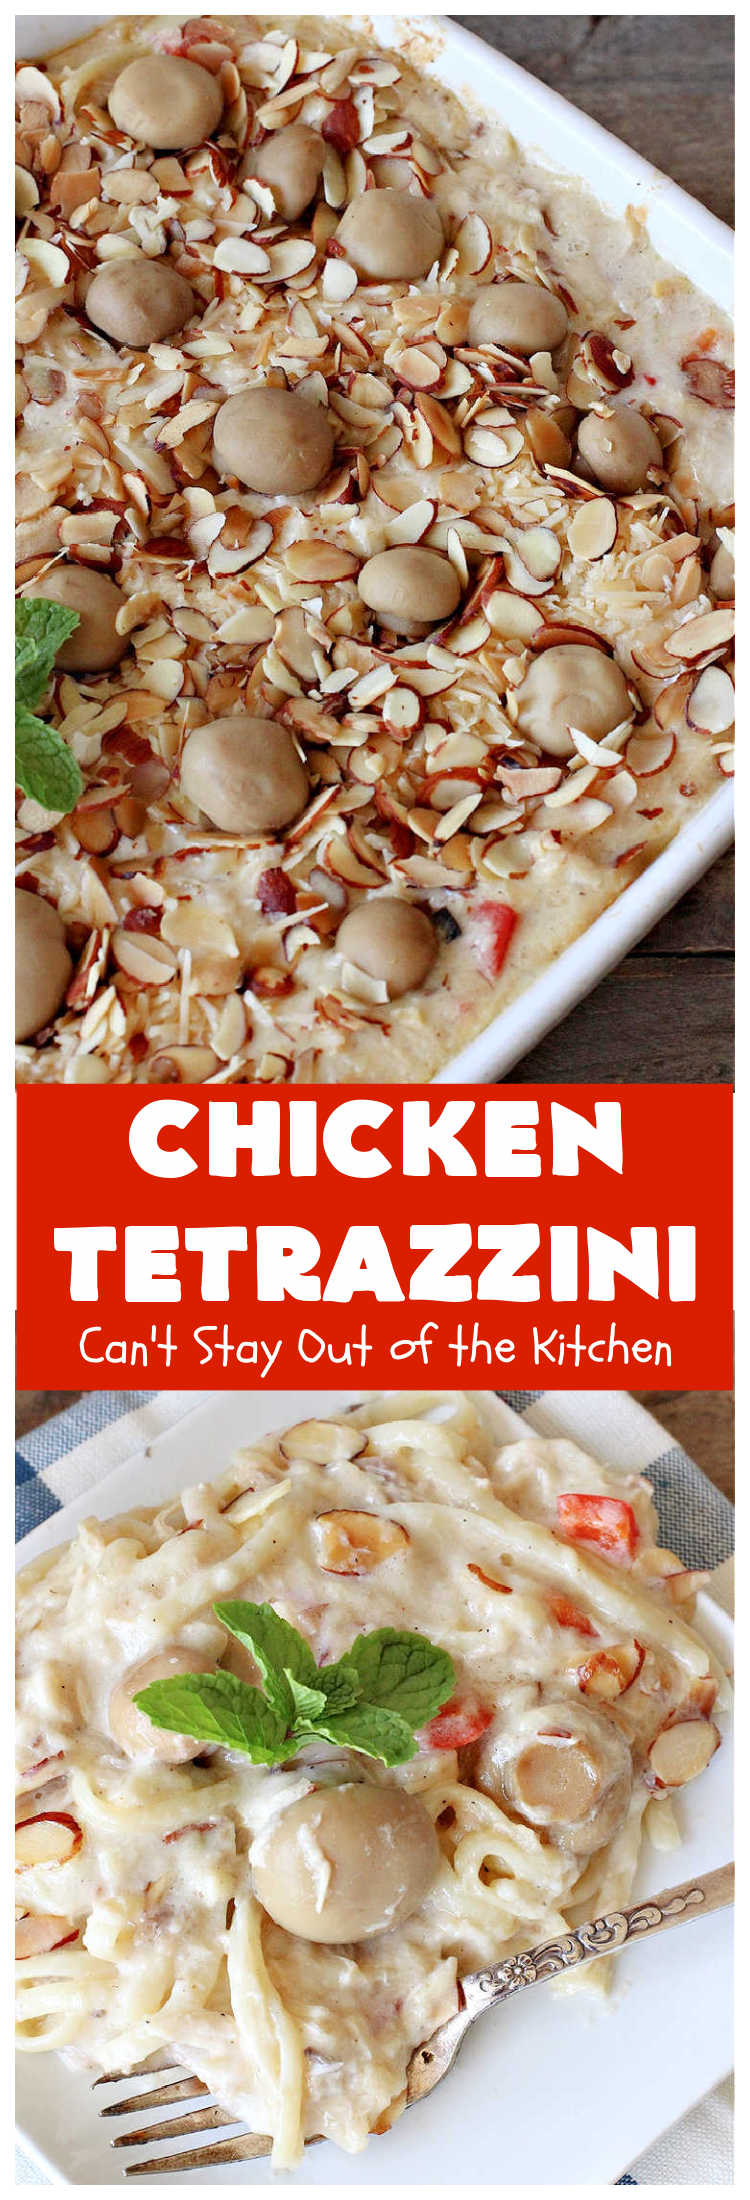 Chicken Tetrazzini | Can't Stay Out of the Kitchen | This #pasta entree is absolutely amazing. It has a thick, creamy, cheesy sauce that' so wonderfully mouthwatering. It's the perfect #chicken dish for company, too. #mushrooms #almonds #mozzarella #parmesan #linguine #ChickenTetrazzini